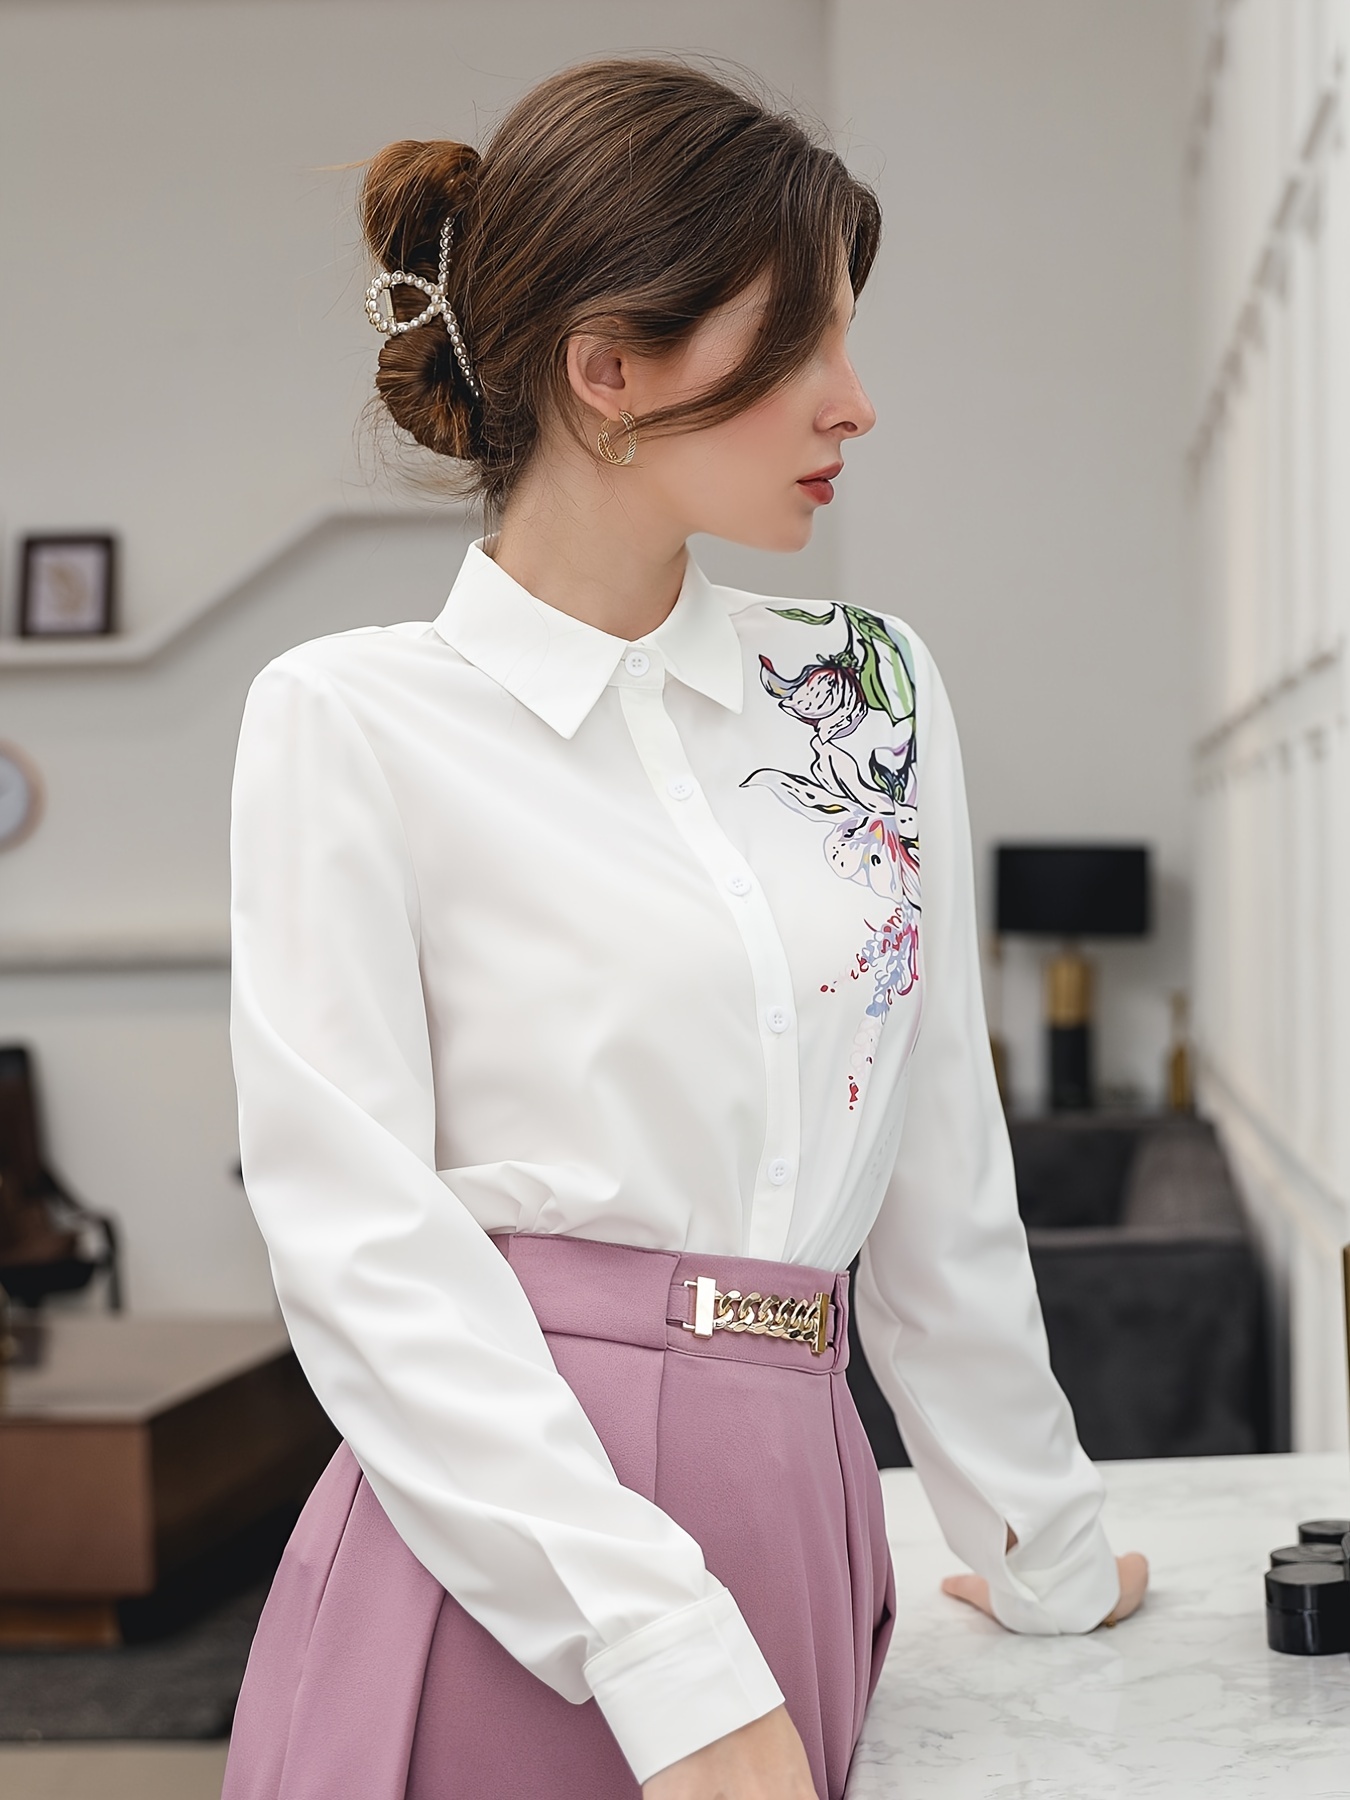 Women Floral Printed Blouse Button Shirt Embroidered Puff Sleeve Tops Lapel